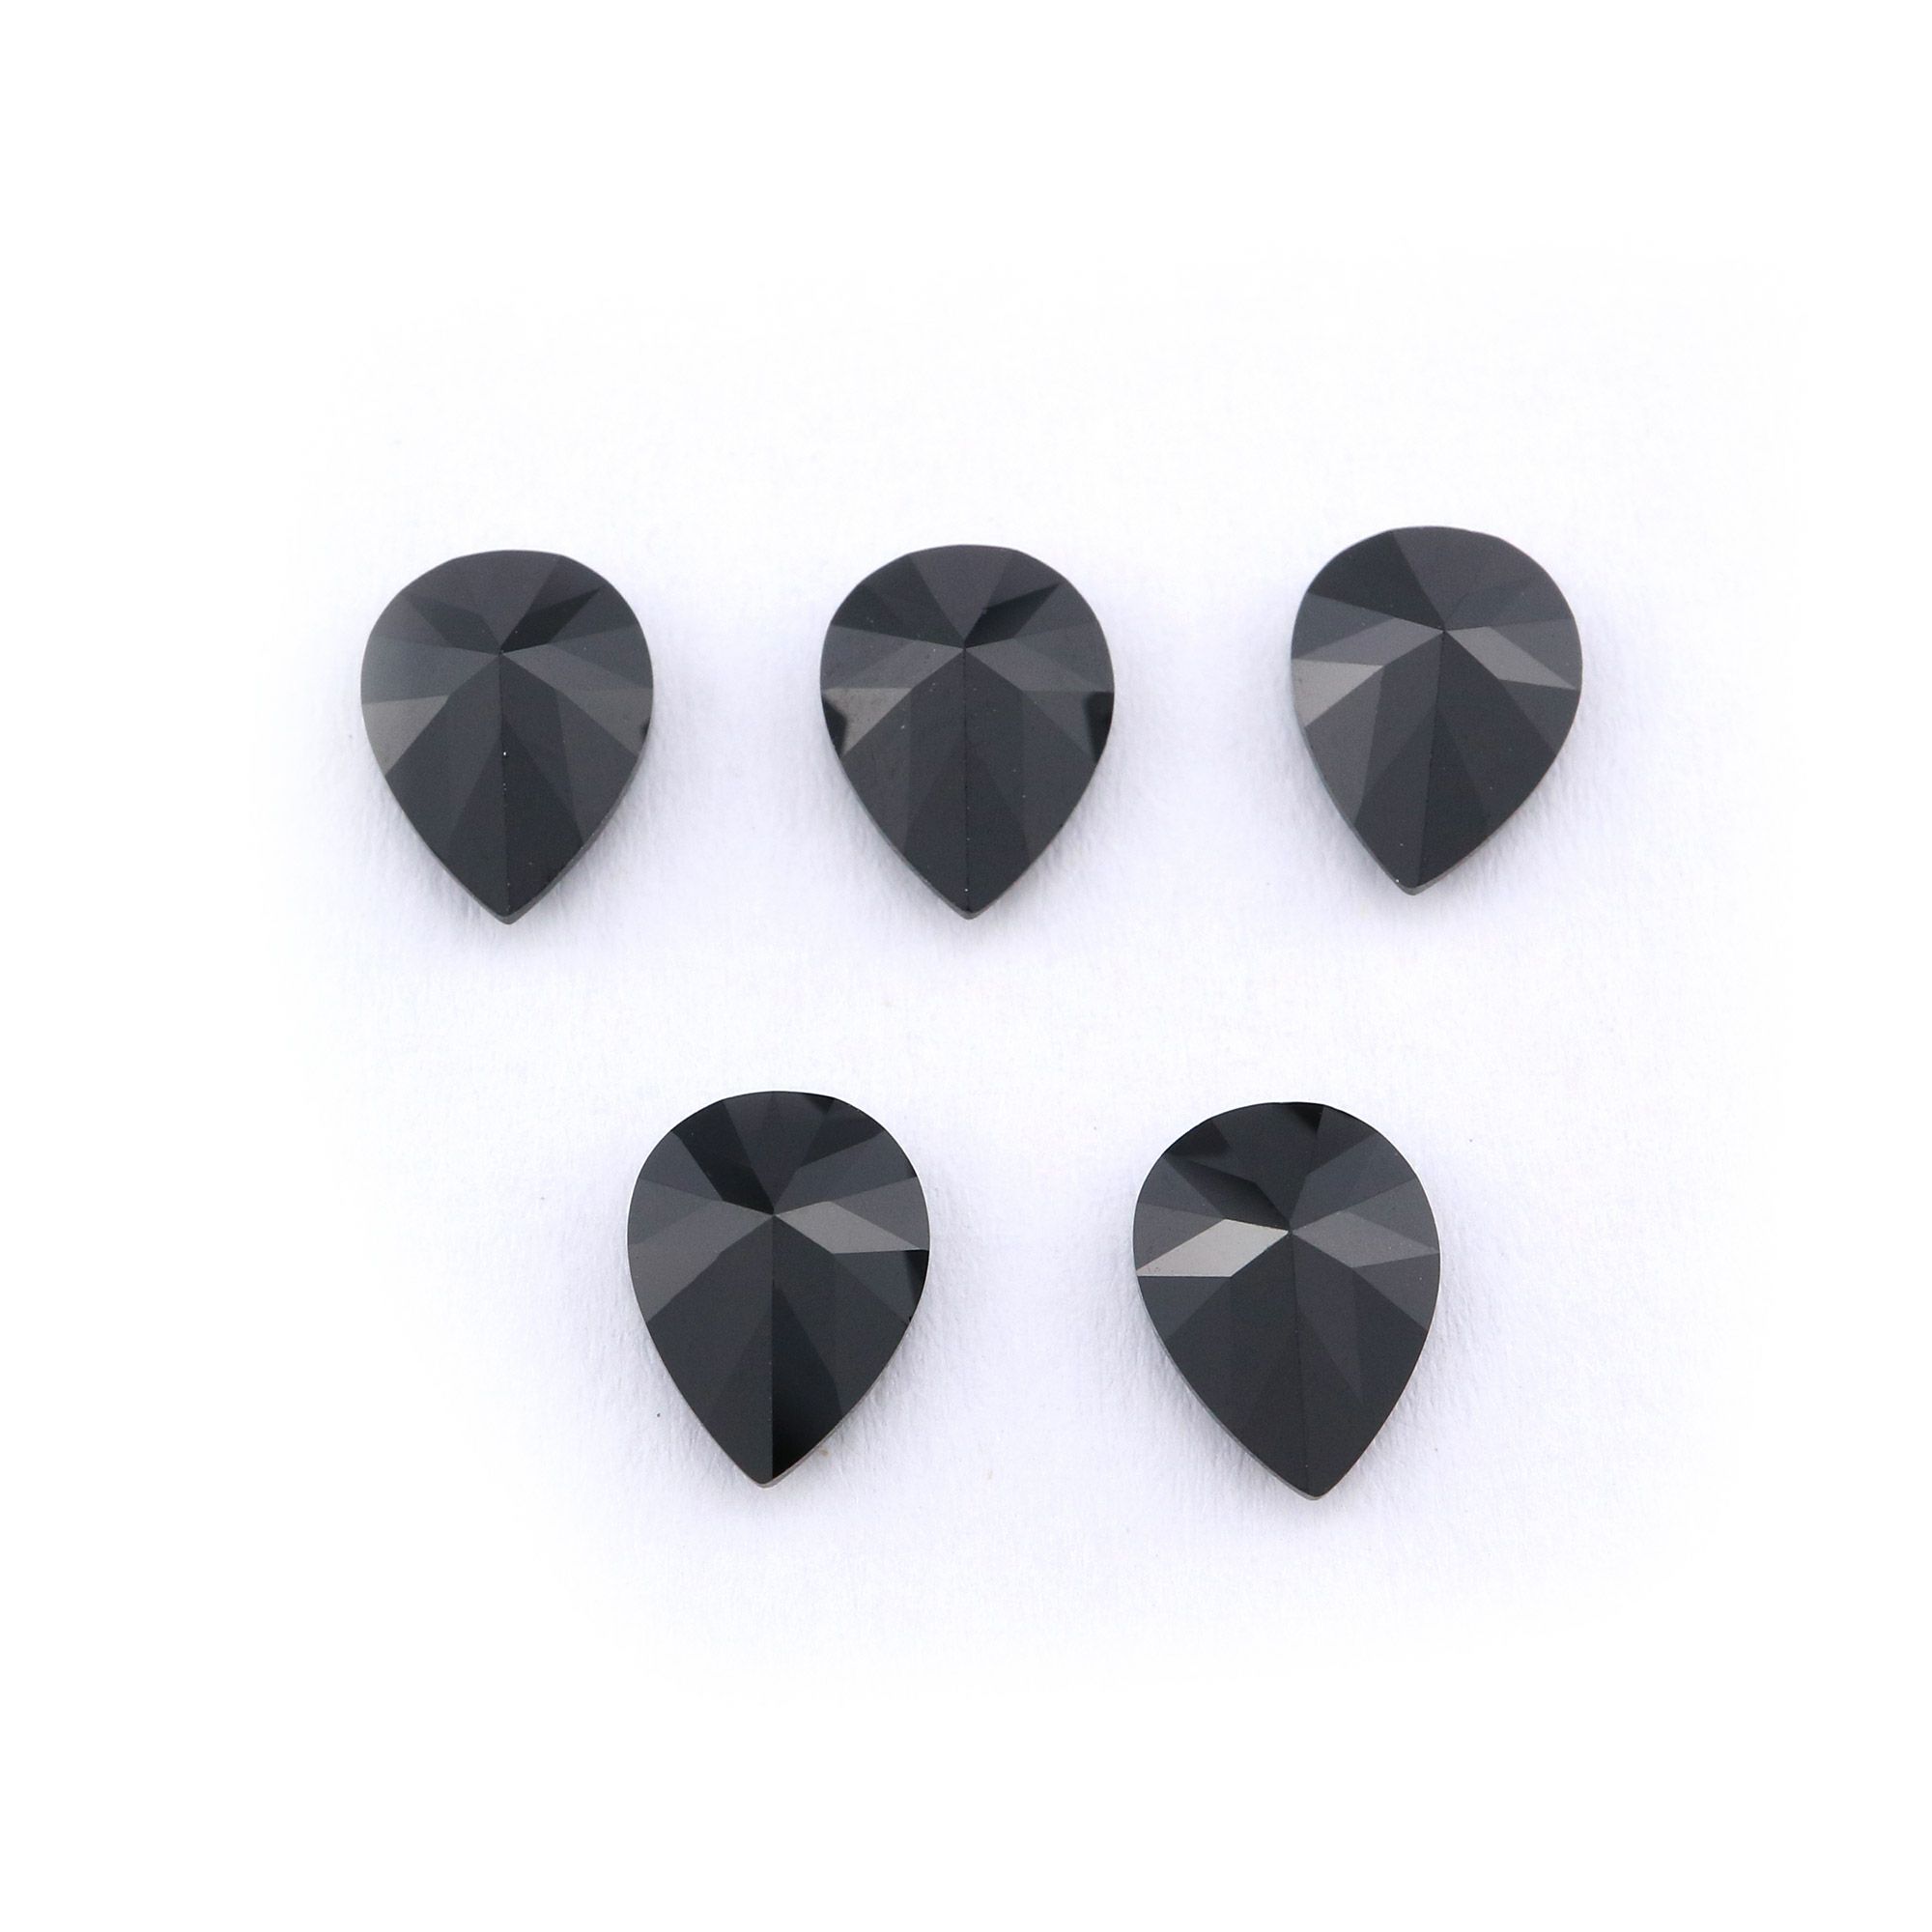 5Pcs Pear Black Spinel Faceted Cut Loose Gemstone Natural Semi Precious Stone DIY Jewelry Supplies 4150007 - Click Image to Close